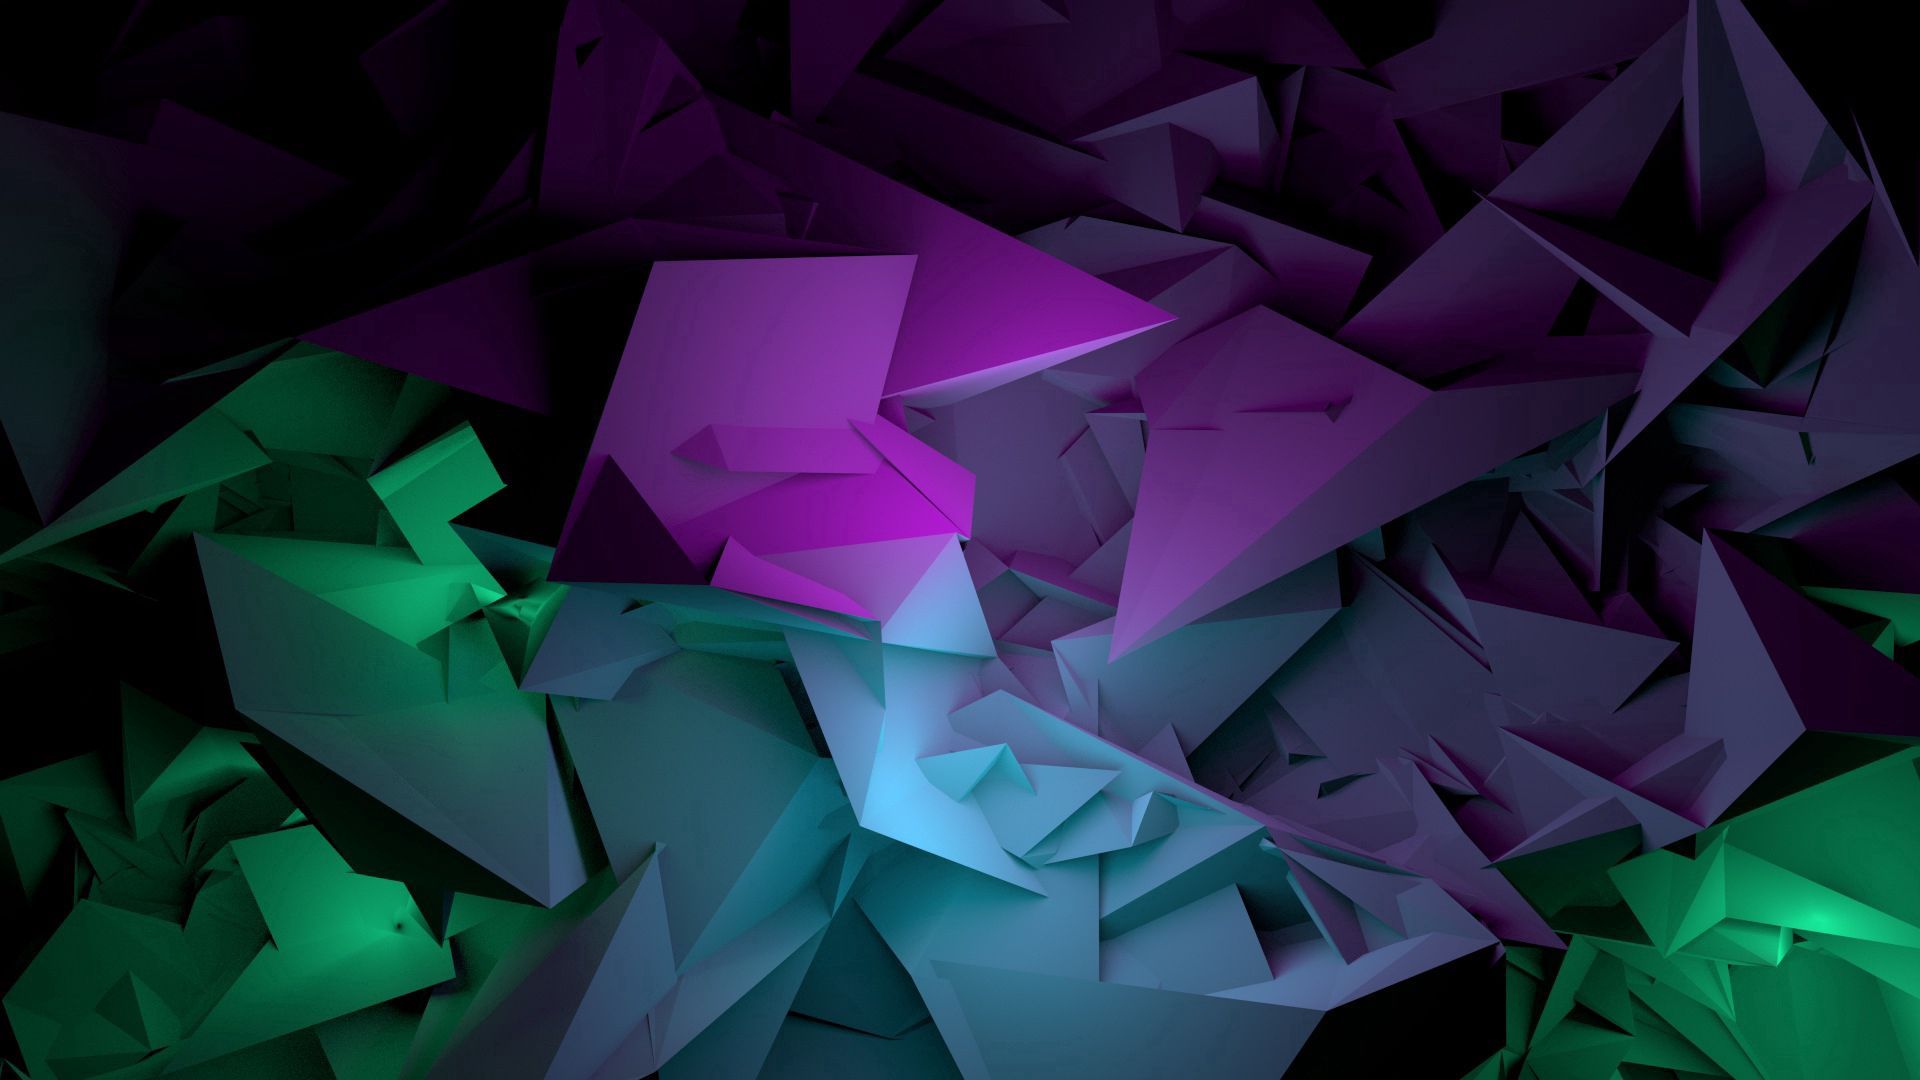 Download wallpaper 1920x1080 abstract, shapes, purple, green HD background